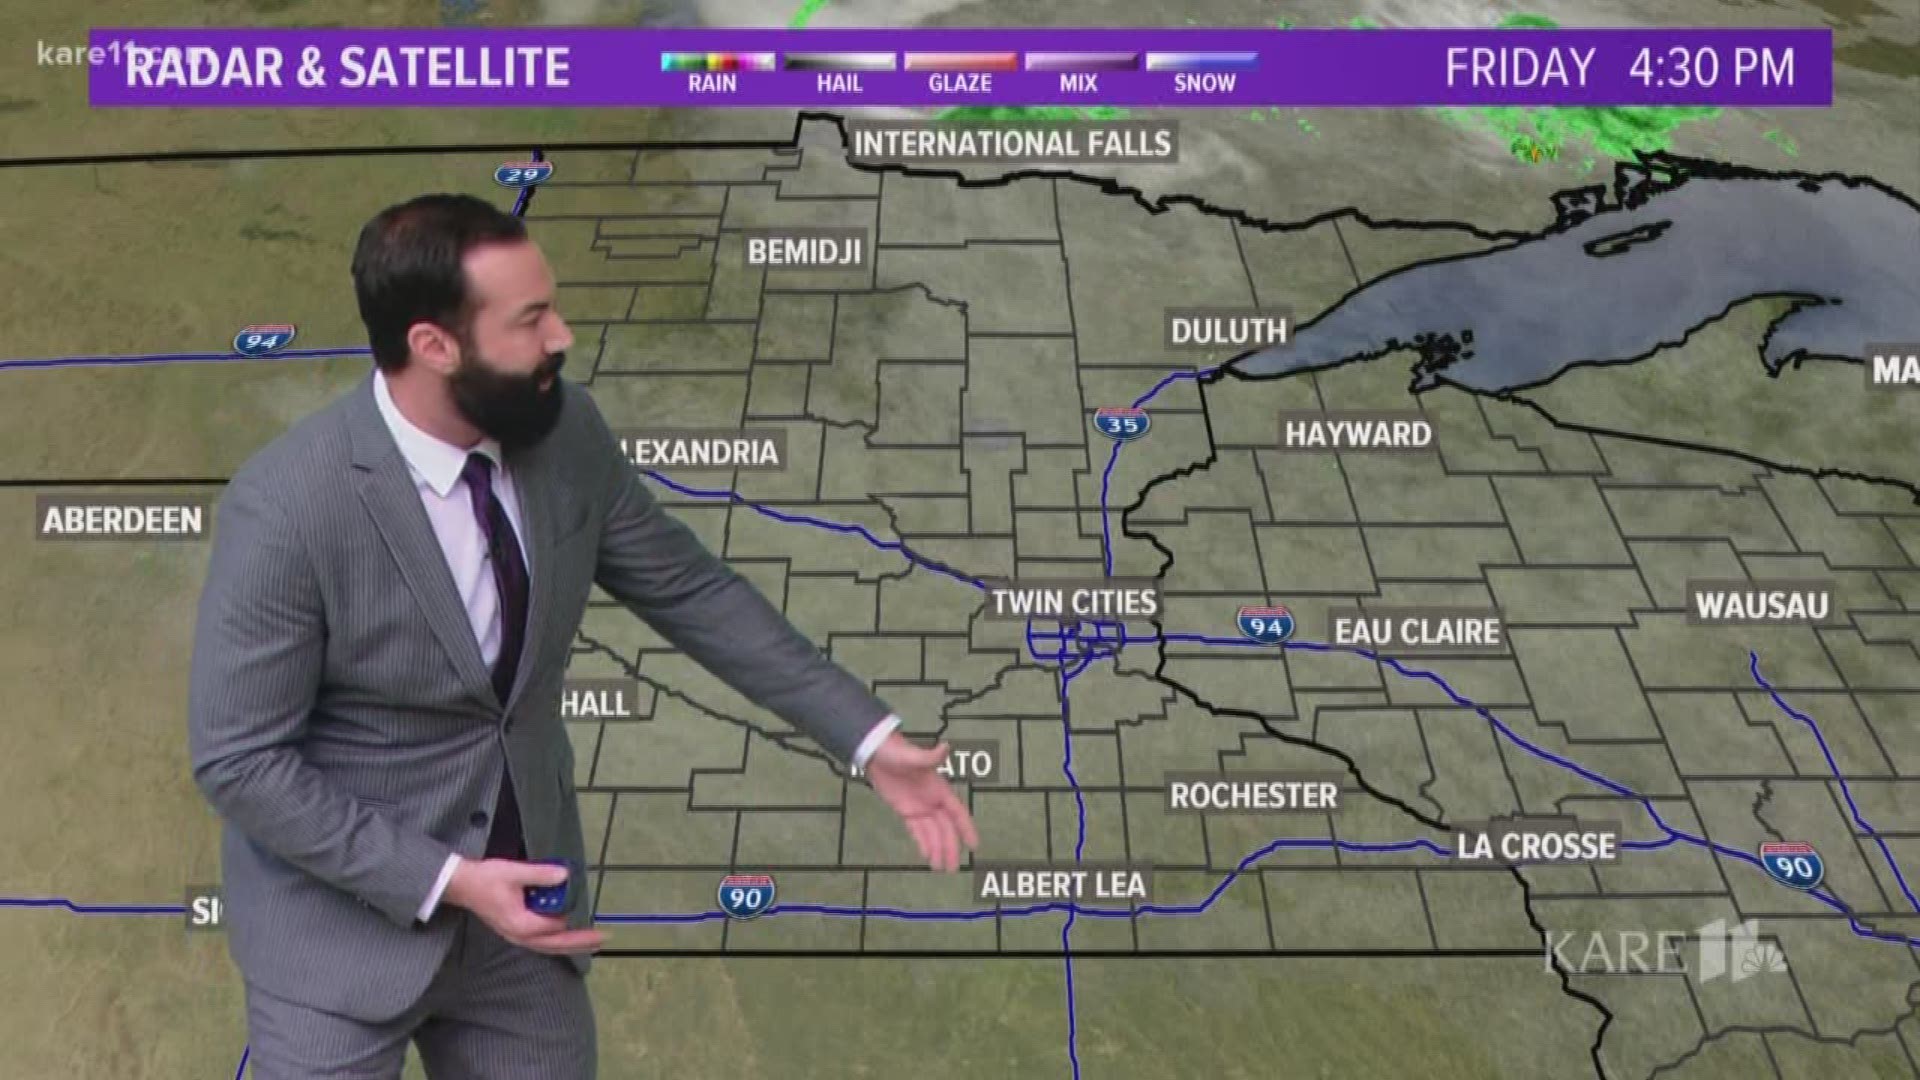 JD's 9-13-19 evening weather forecast